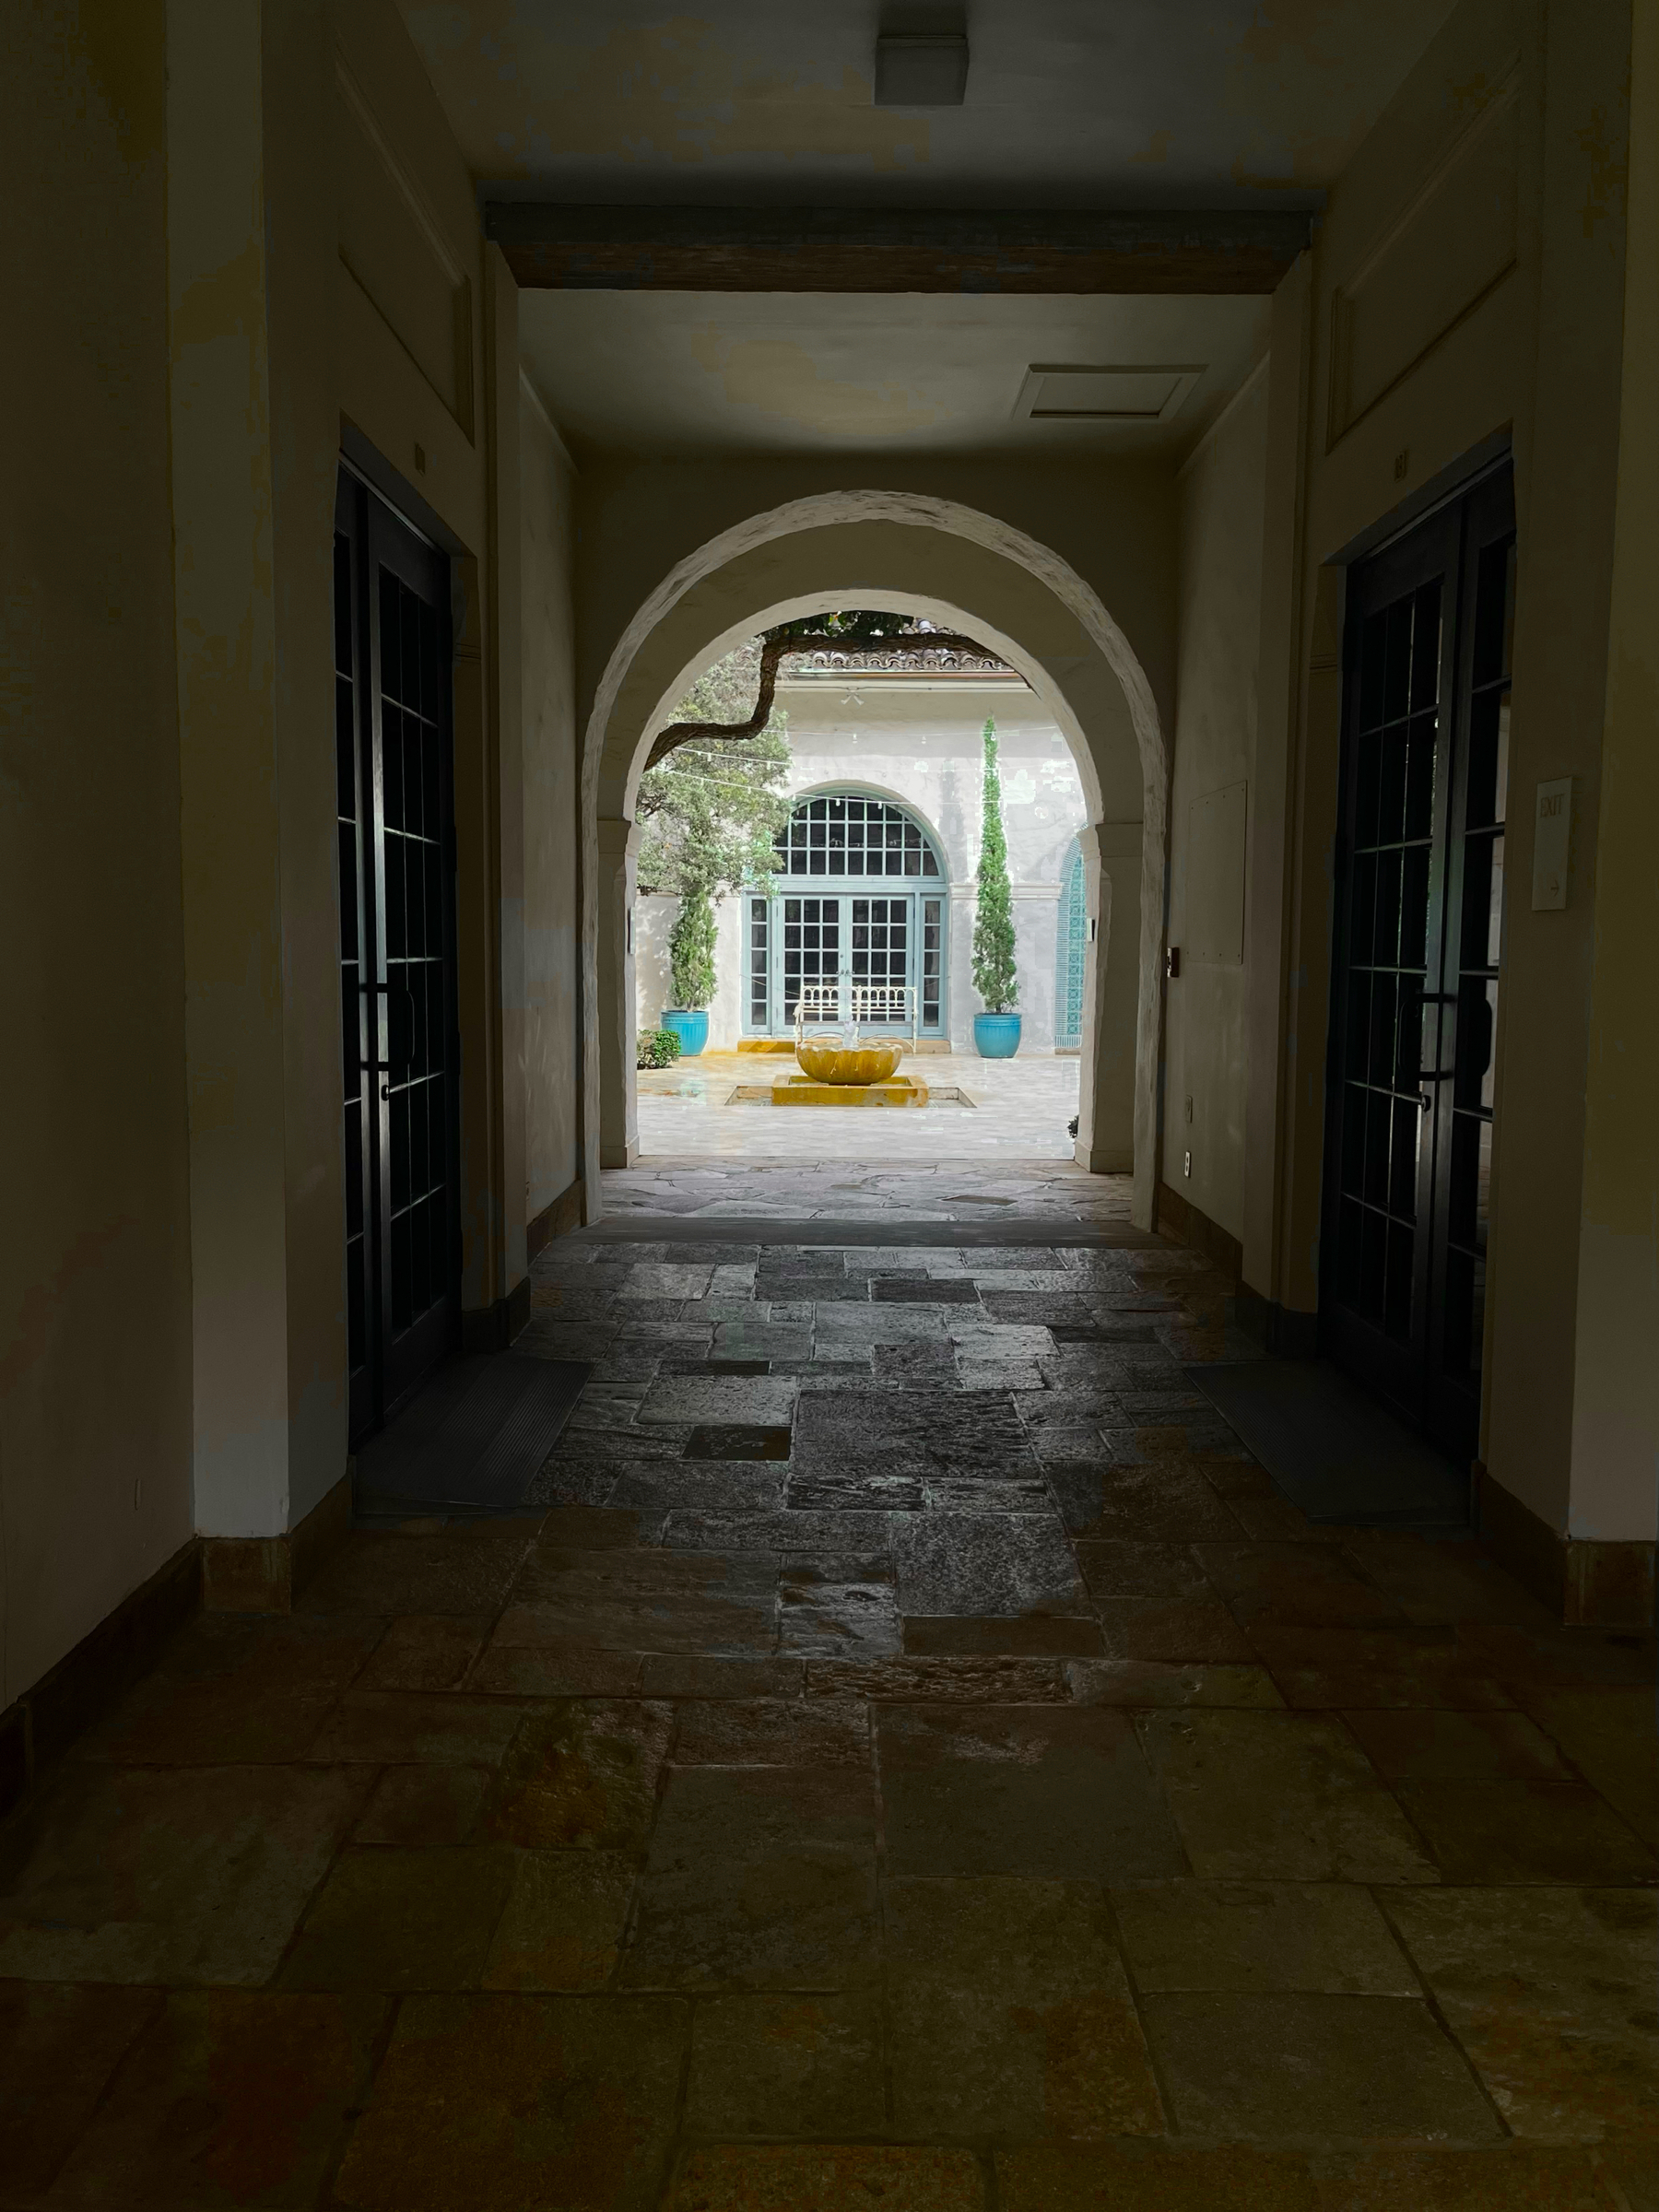 A hallway with stone flooring, wooden doors, and aged walls, leads to a bright courtyard with a fountain.